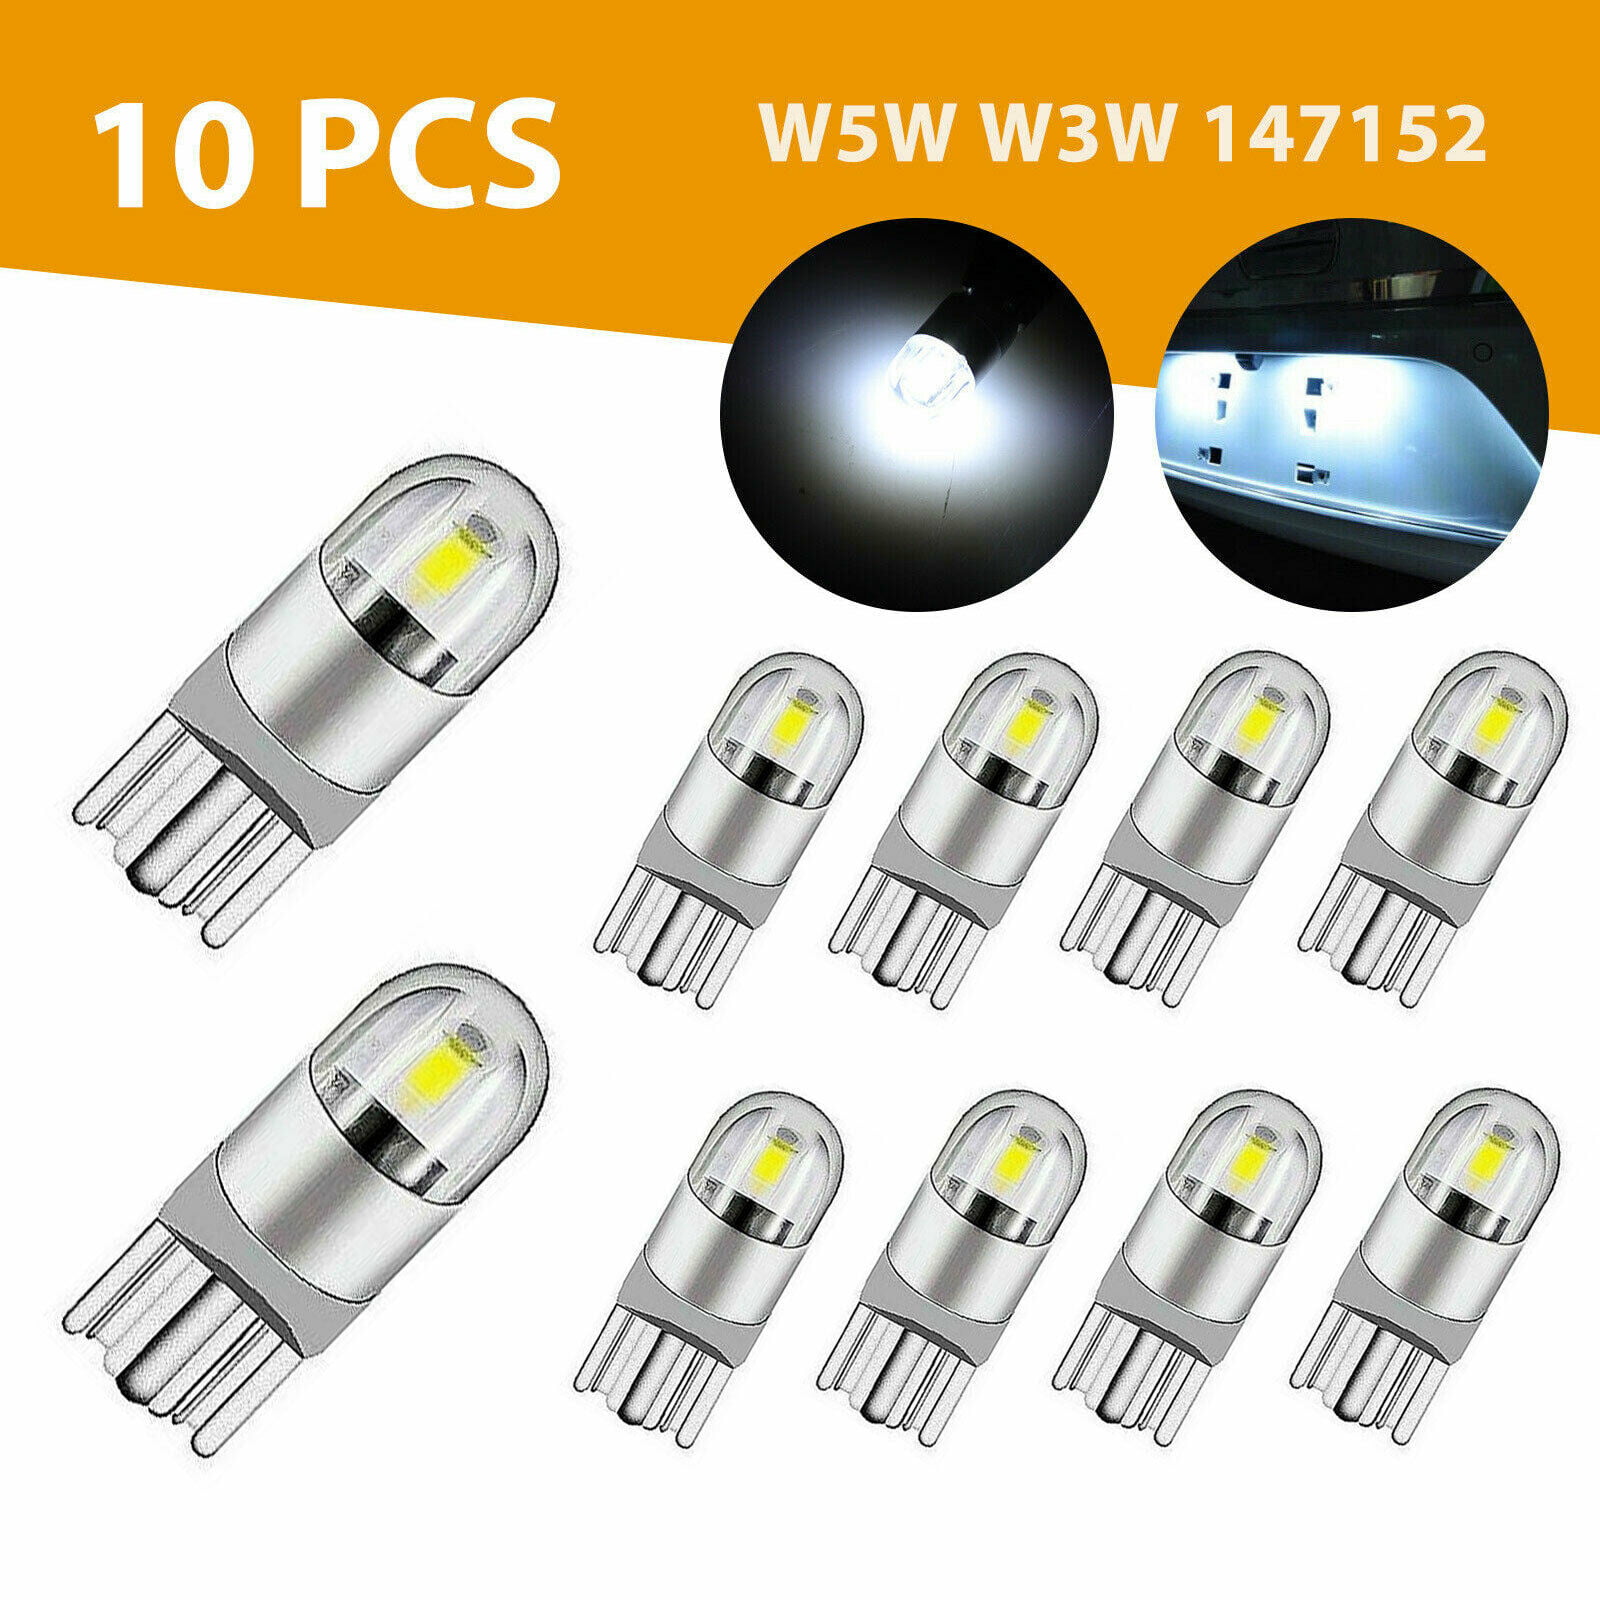 High Key 10x T10 501 Car Bulbs Led Error Free Canbus SMD Cob White Ice Blue W5W Side Light Replacement for Car Interior Dome Map Door Dashboard Trunk Courtesy License Plate Light 10x, White 